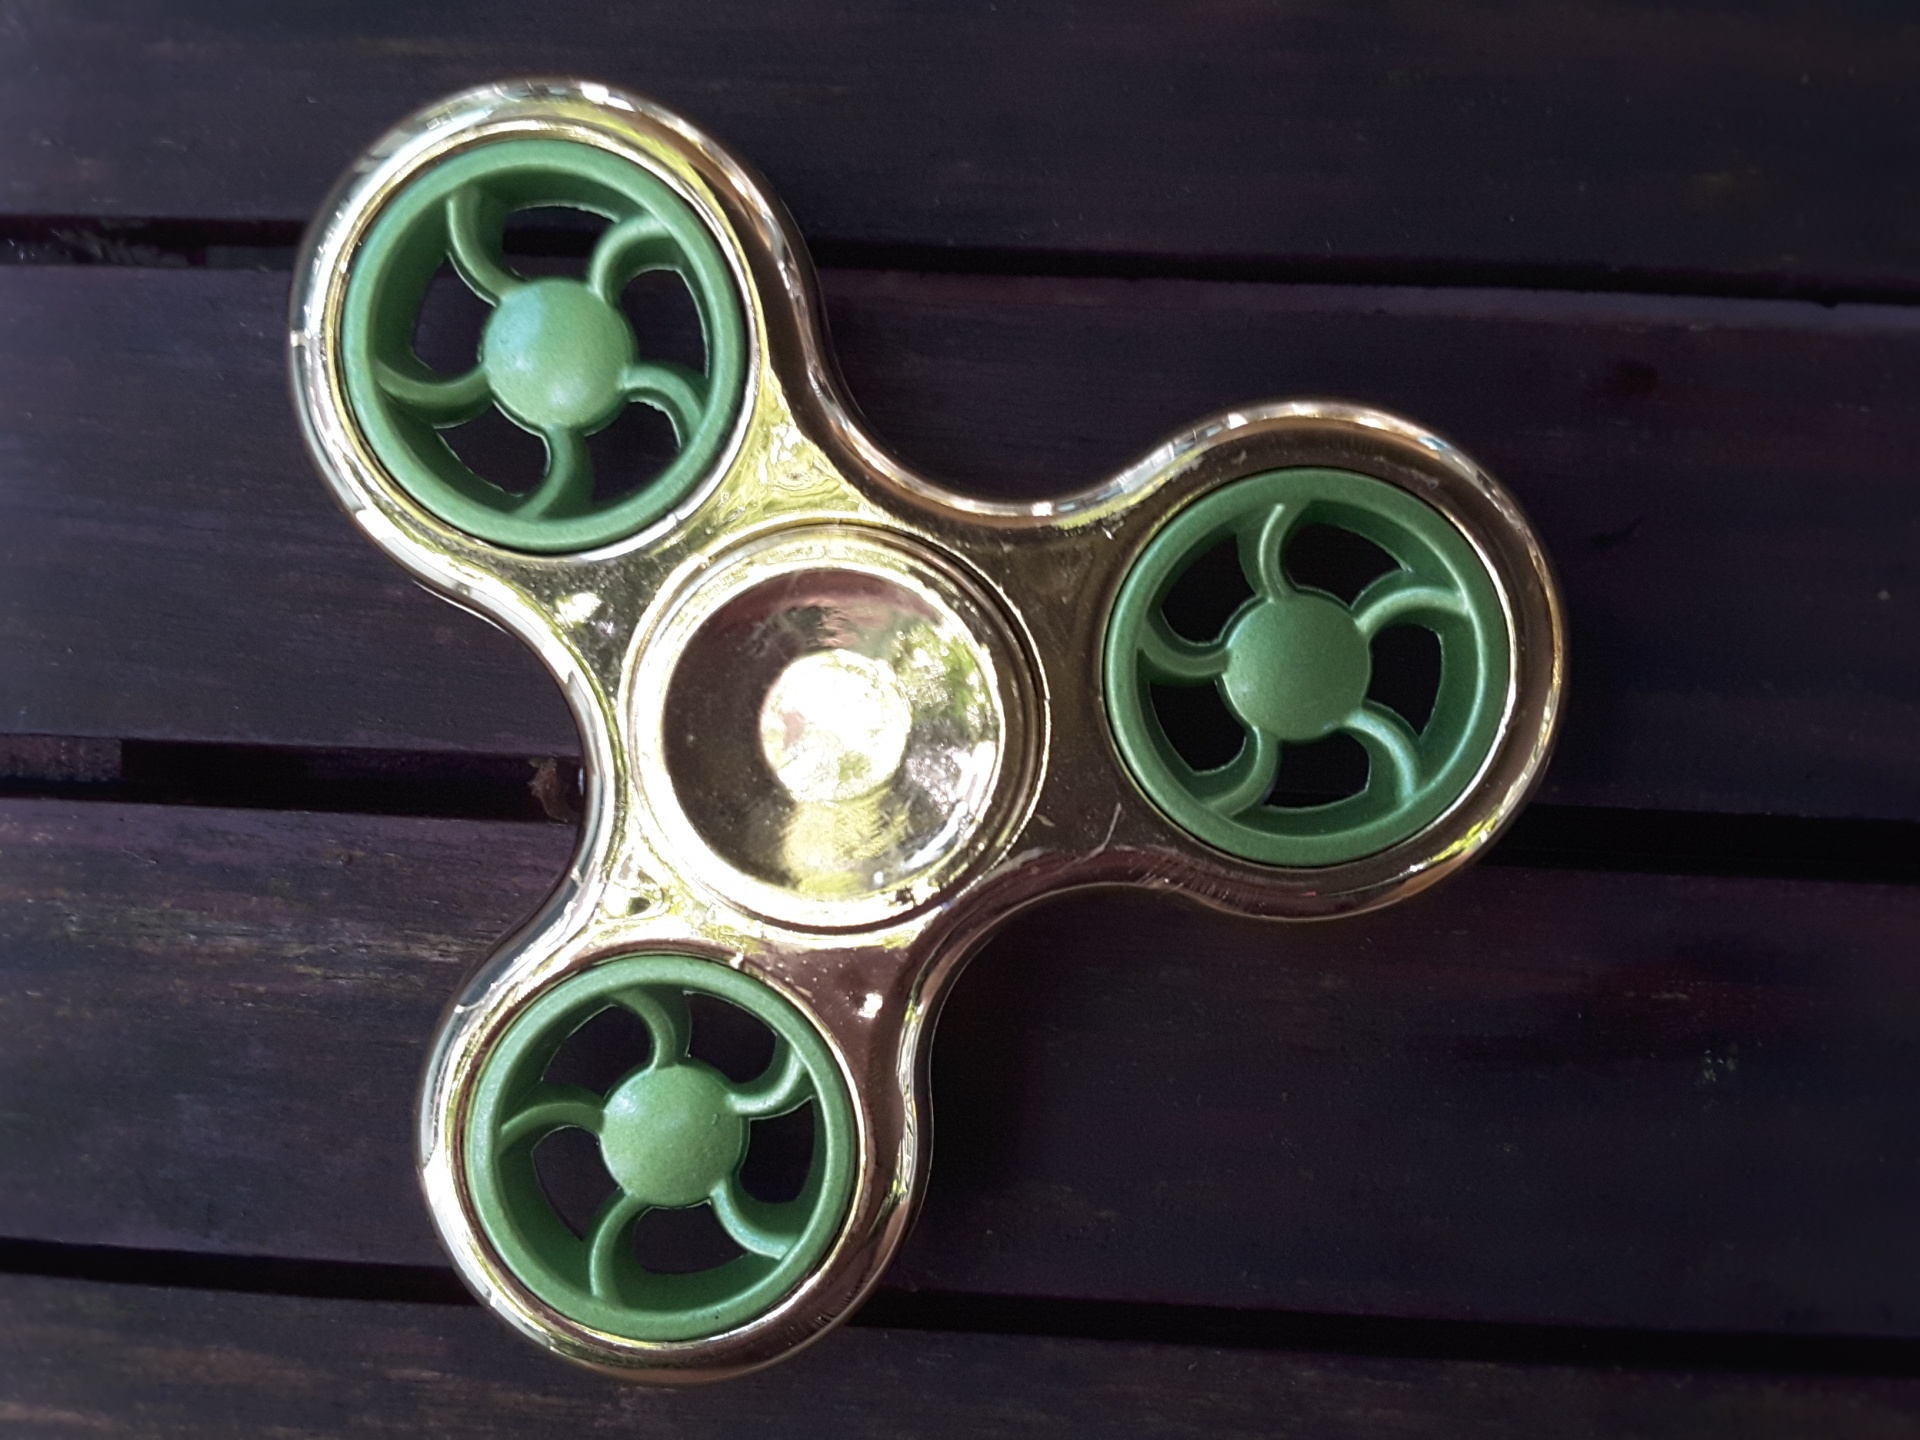 green spinner toy closeup photo